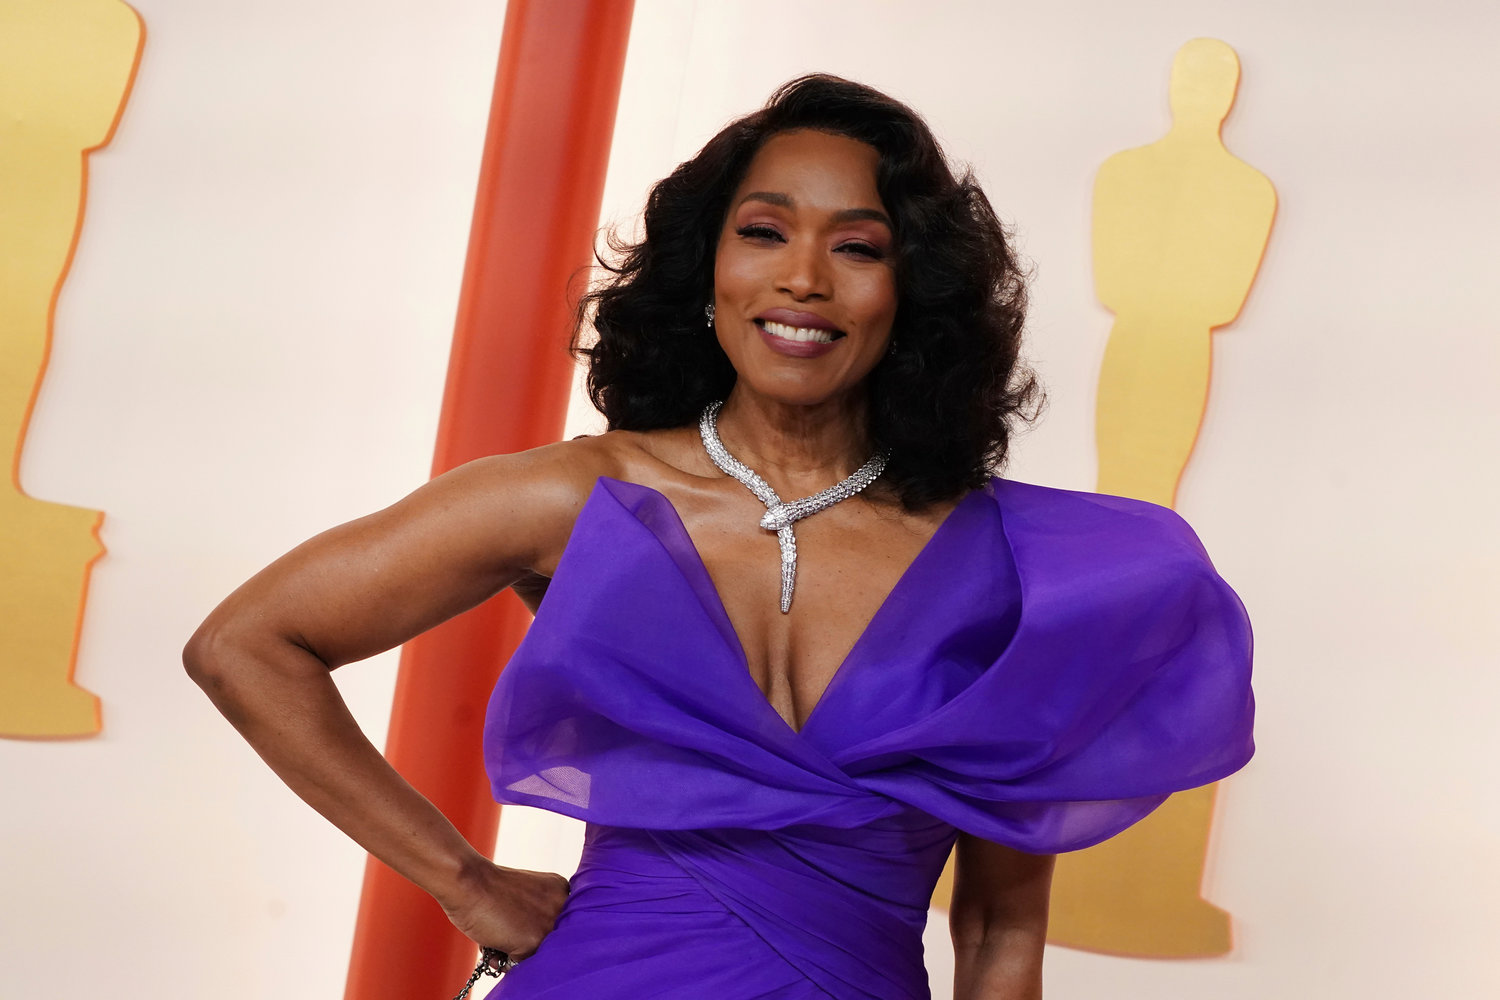 Angela Bassett arrives at the Oscars on Sunday, March 12, 2023, at the Dolby Theatre in Los Angeles. (Photo by Jordan Strauss/Invision/AP)